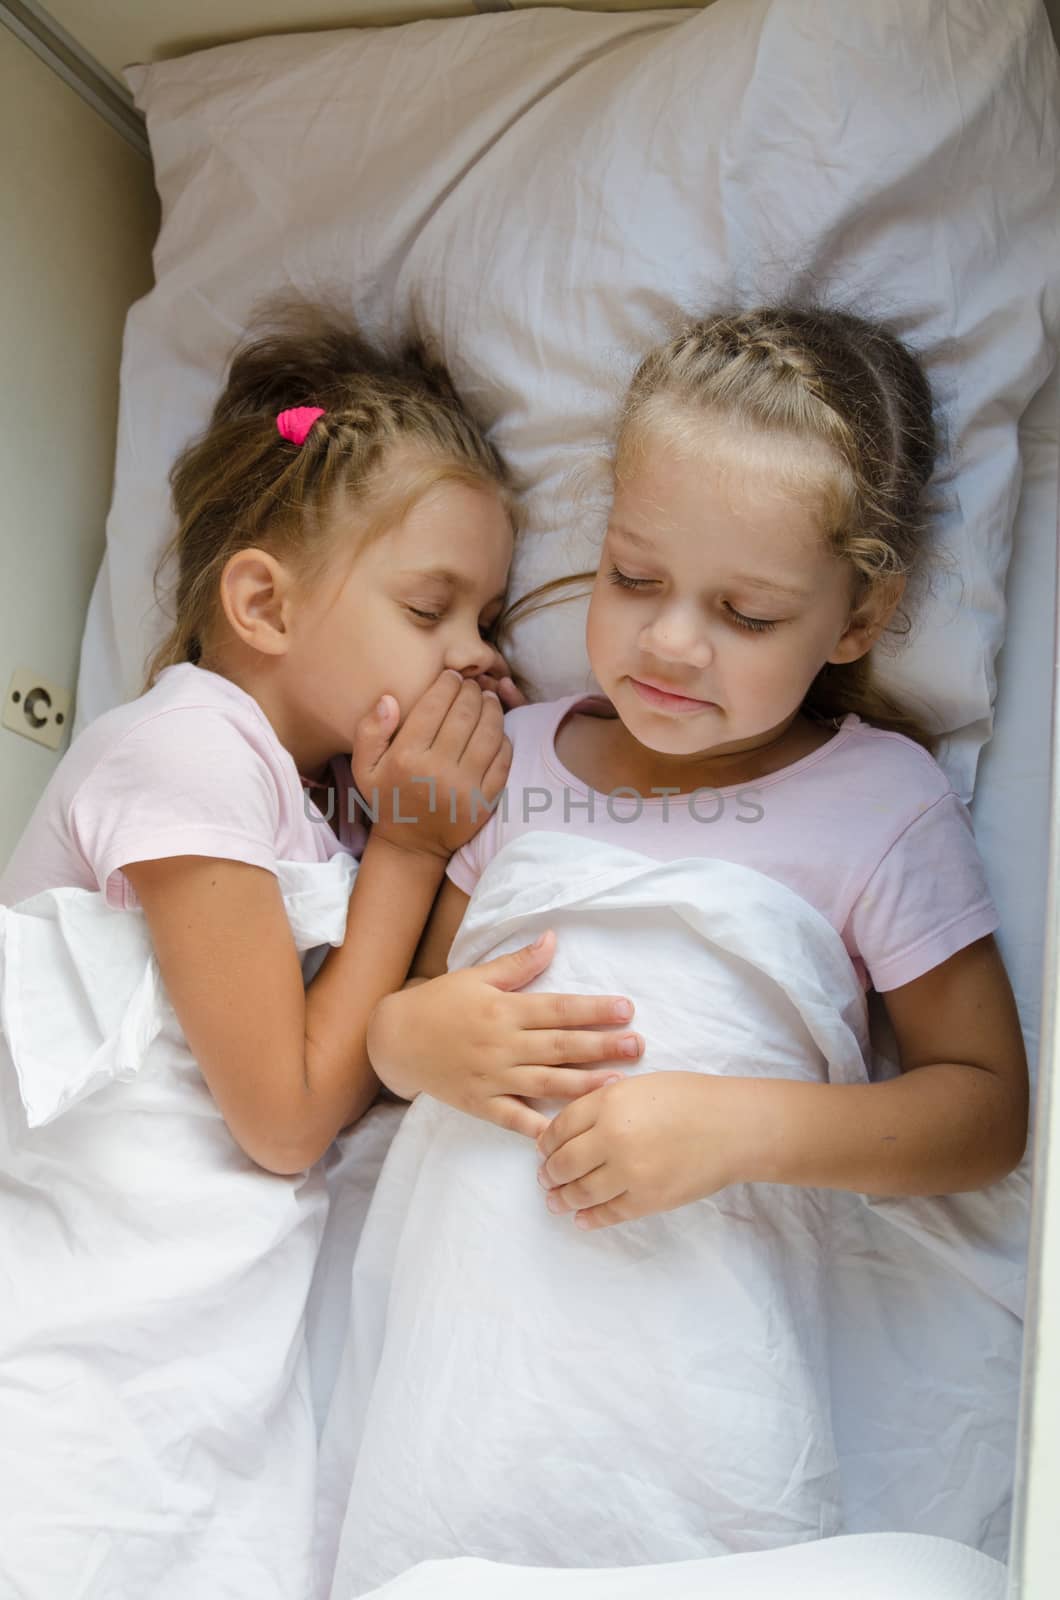 Two little girls sister sleep on a cot in a train